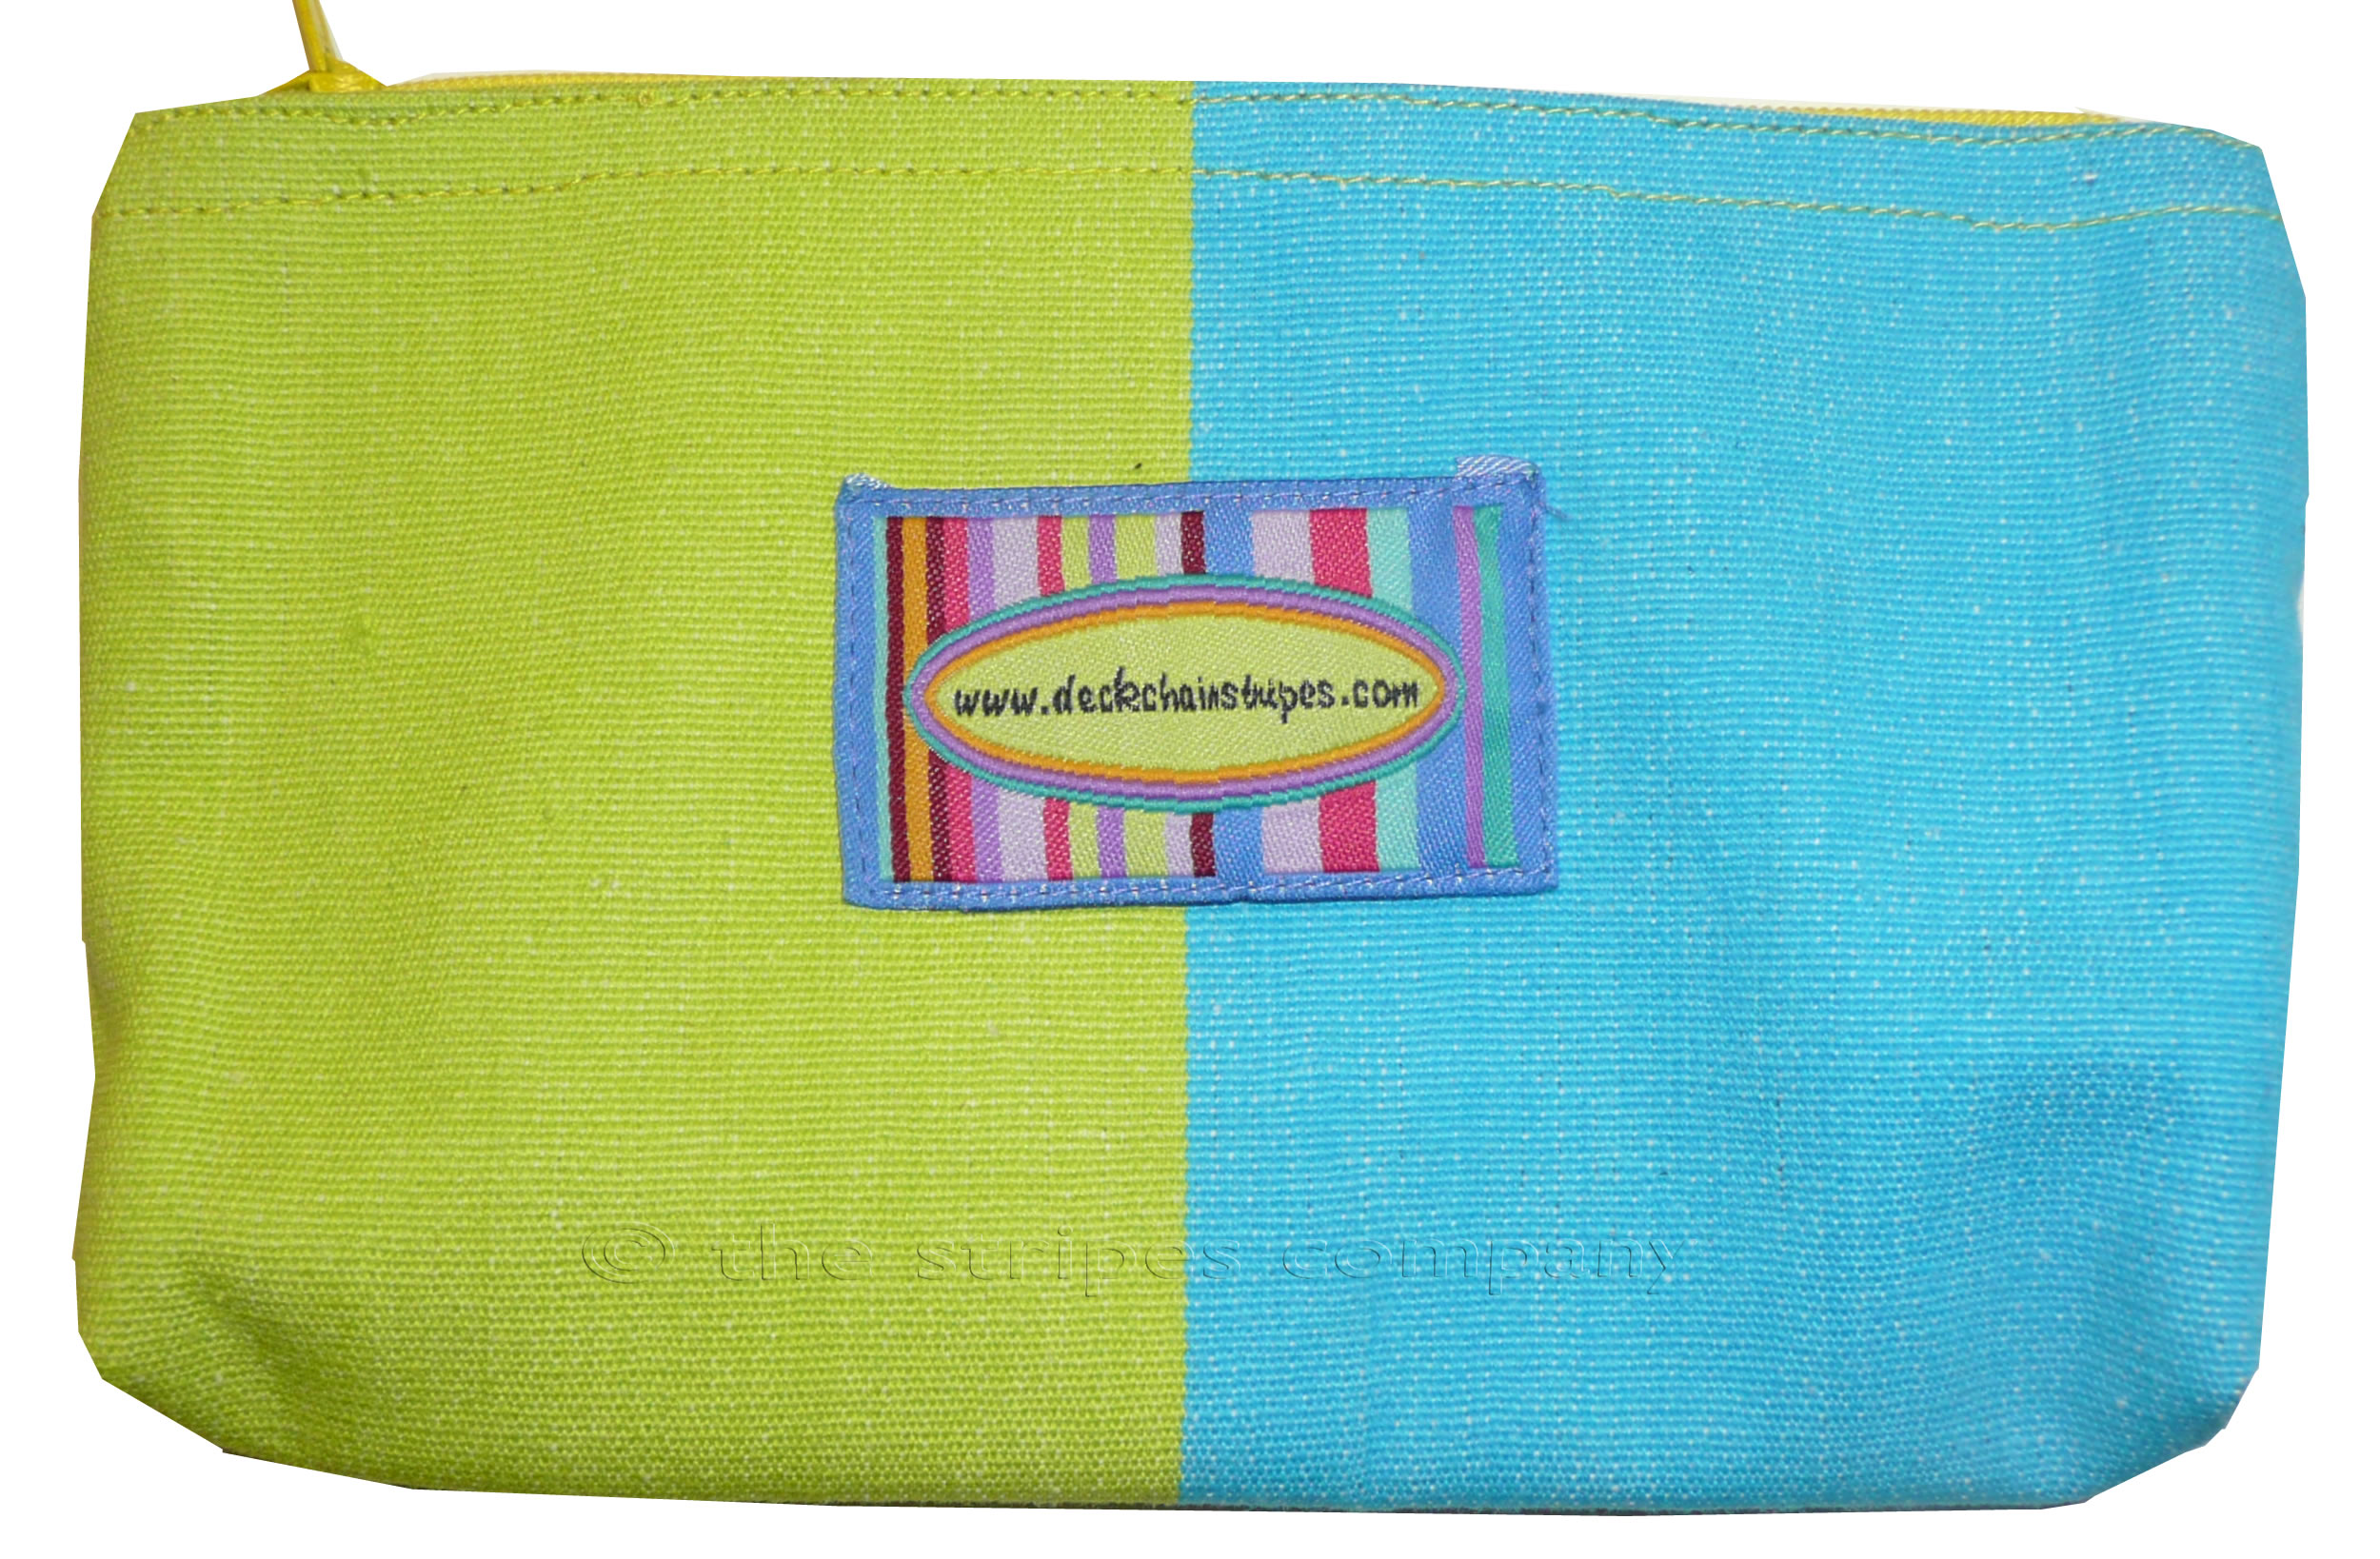 Turquoise and Green Striped Purses | Small Zipped Bags | Cosmetic Bags